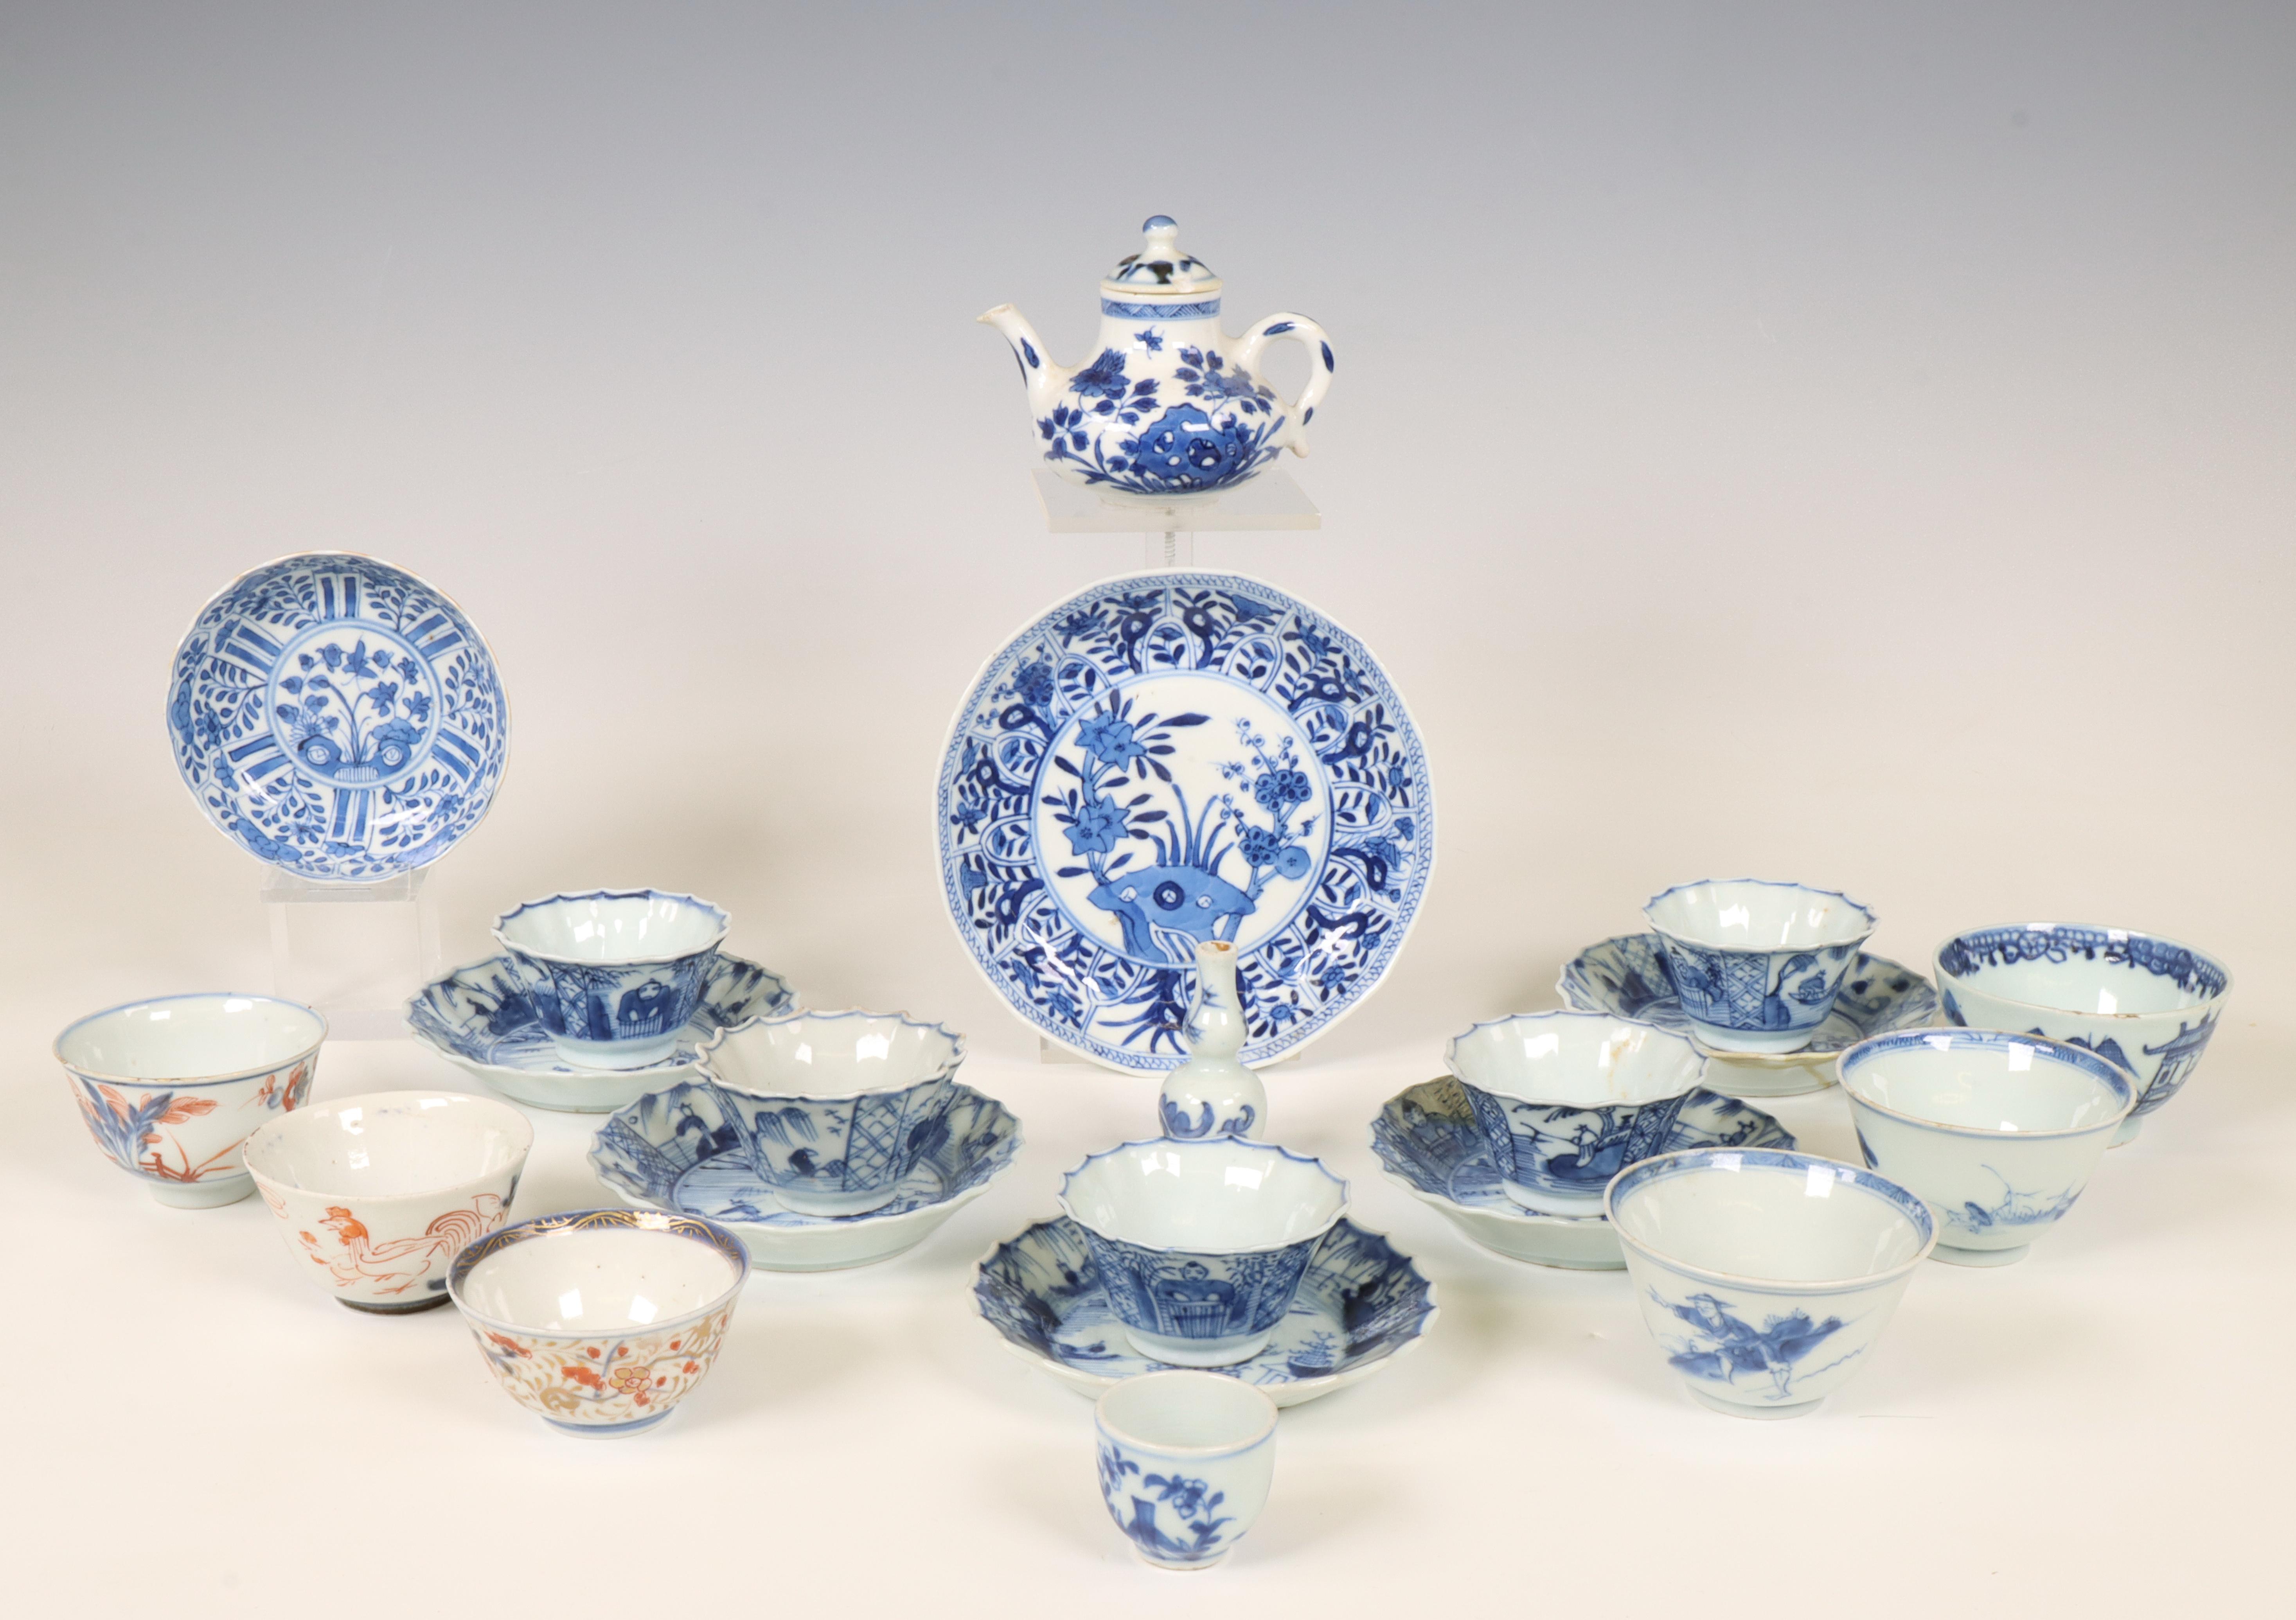 China, collection of blue and white porcelain, 18th century and later,